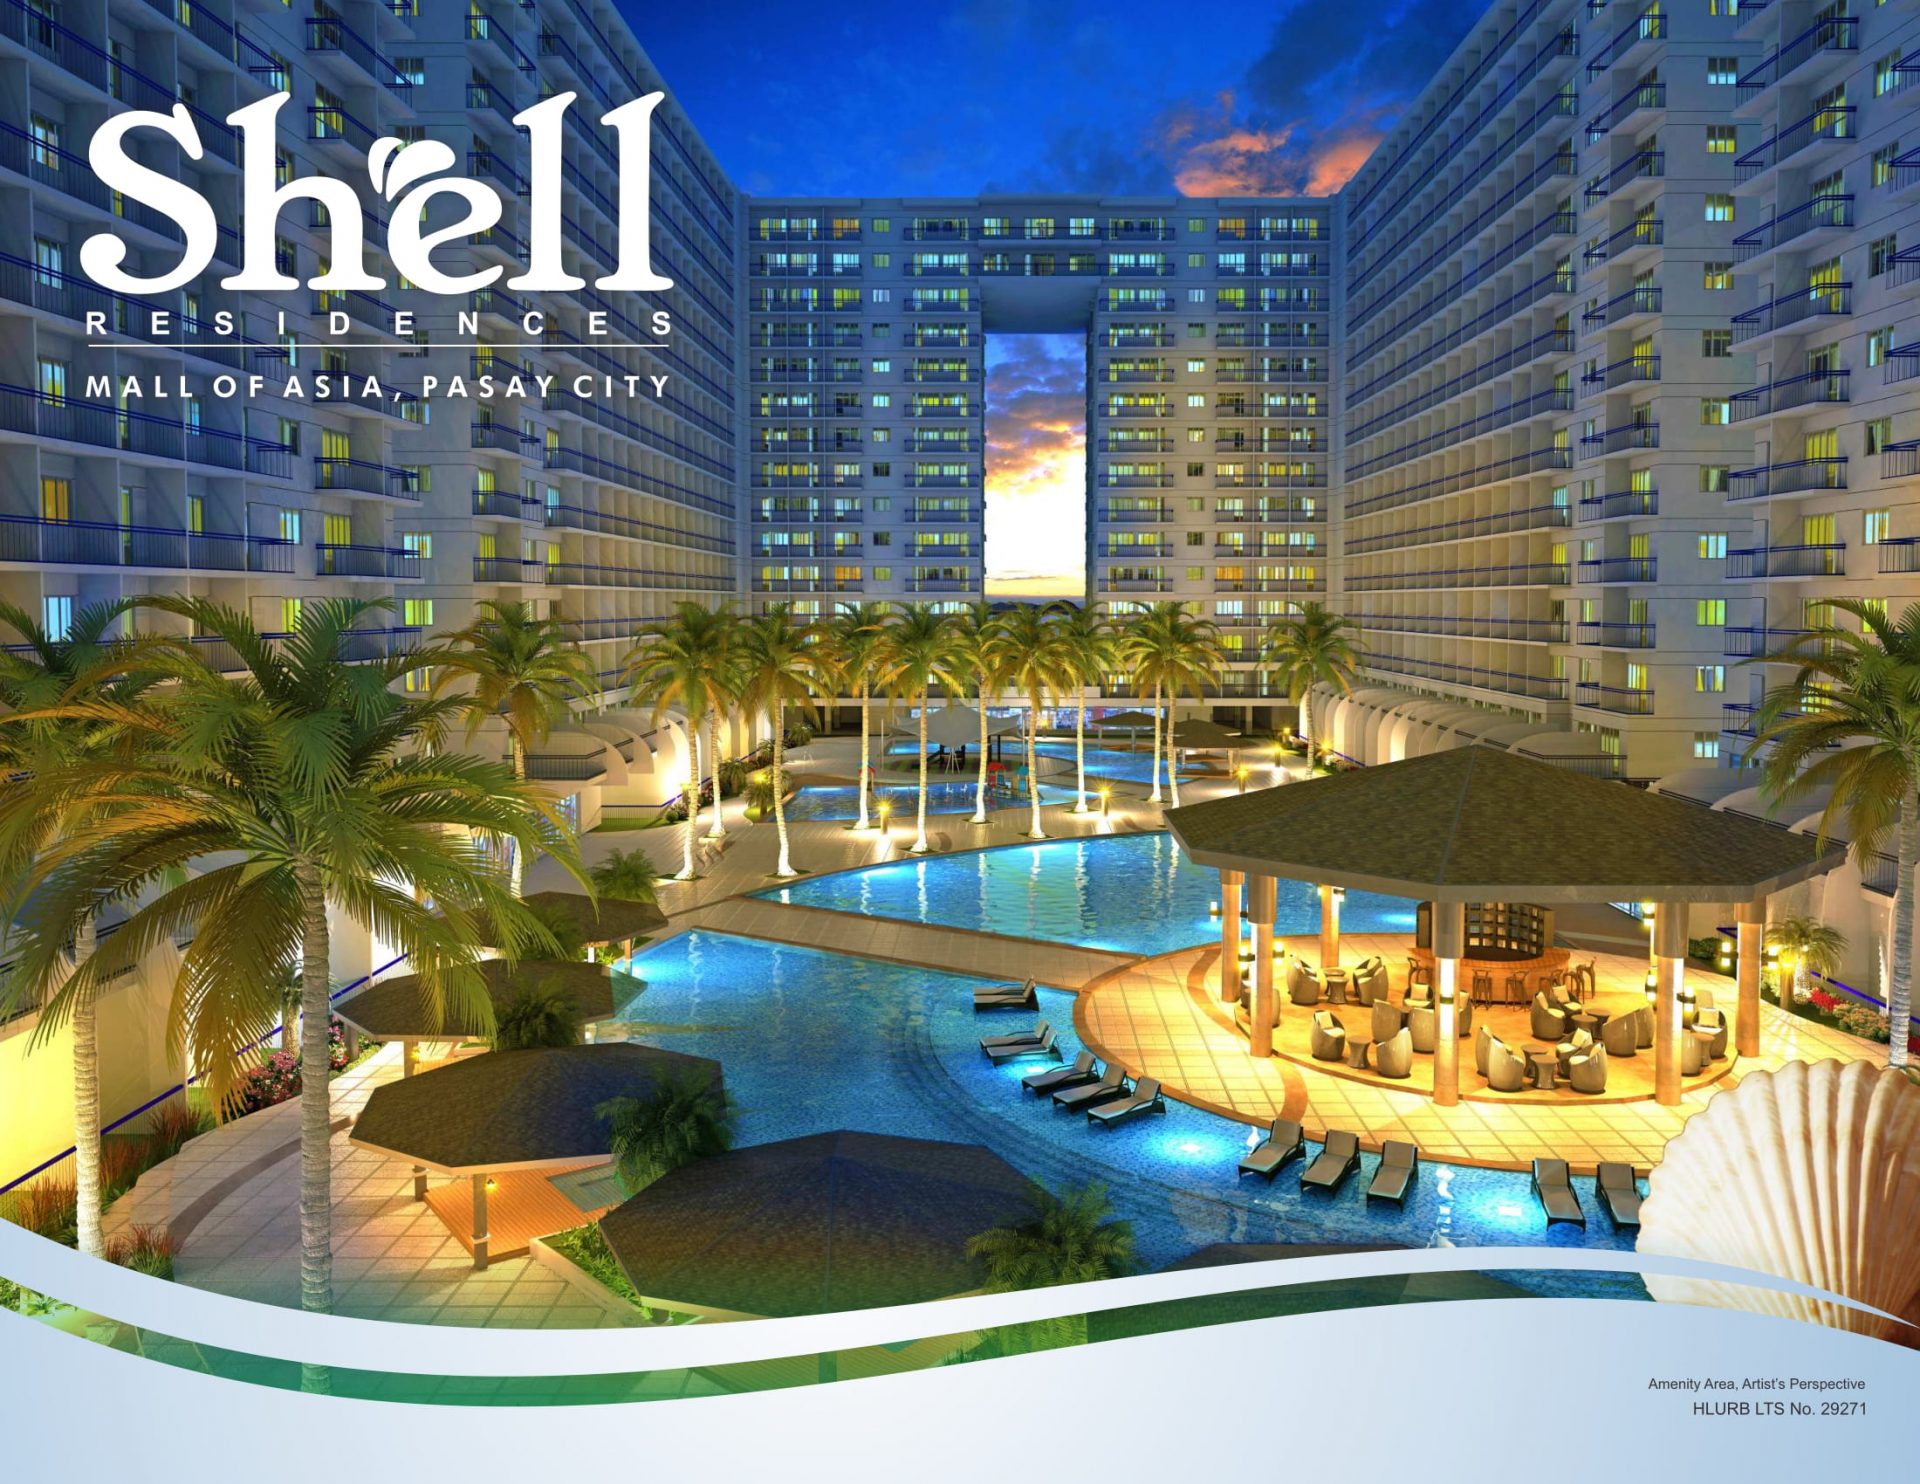 Condo Unit in Shell Residences by Golden Sphere Realty